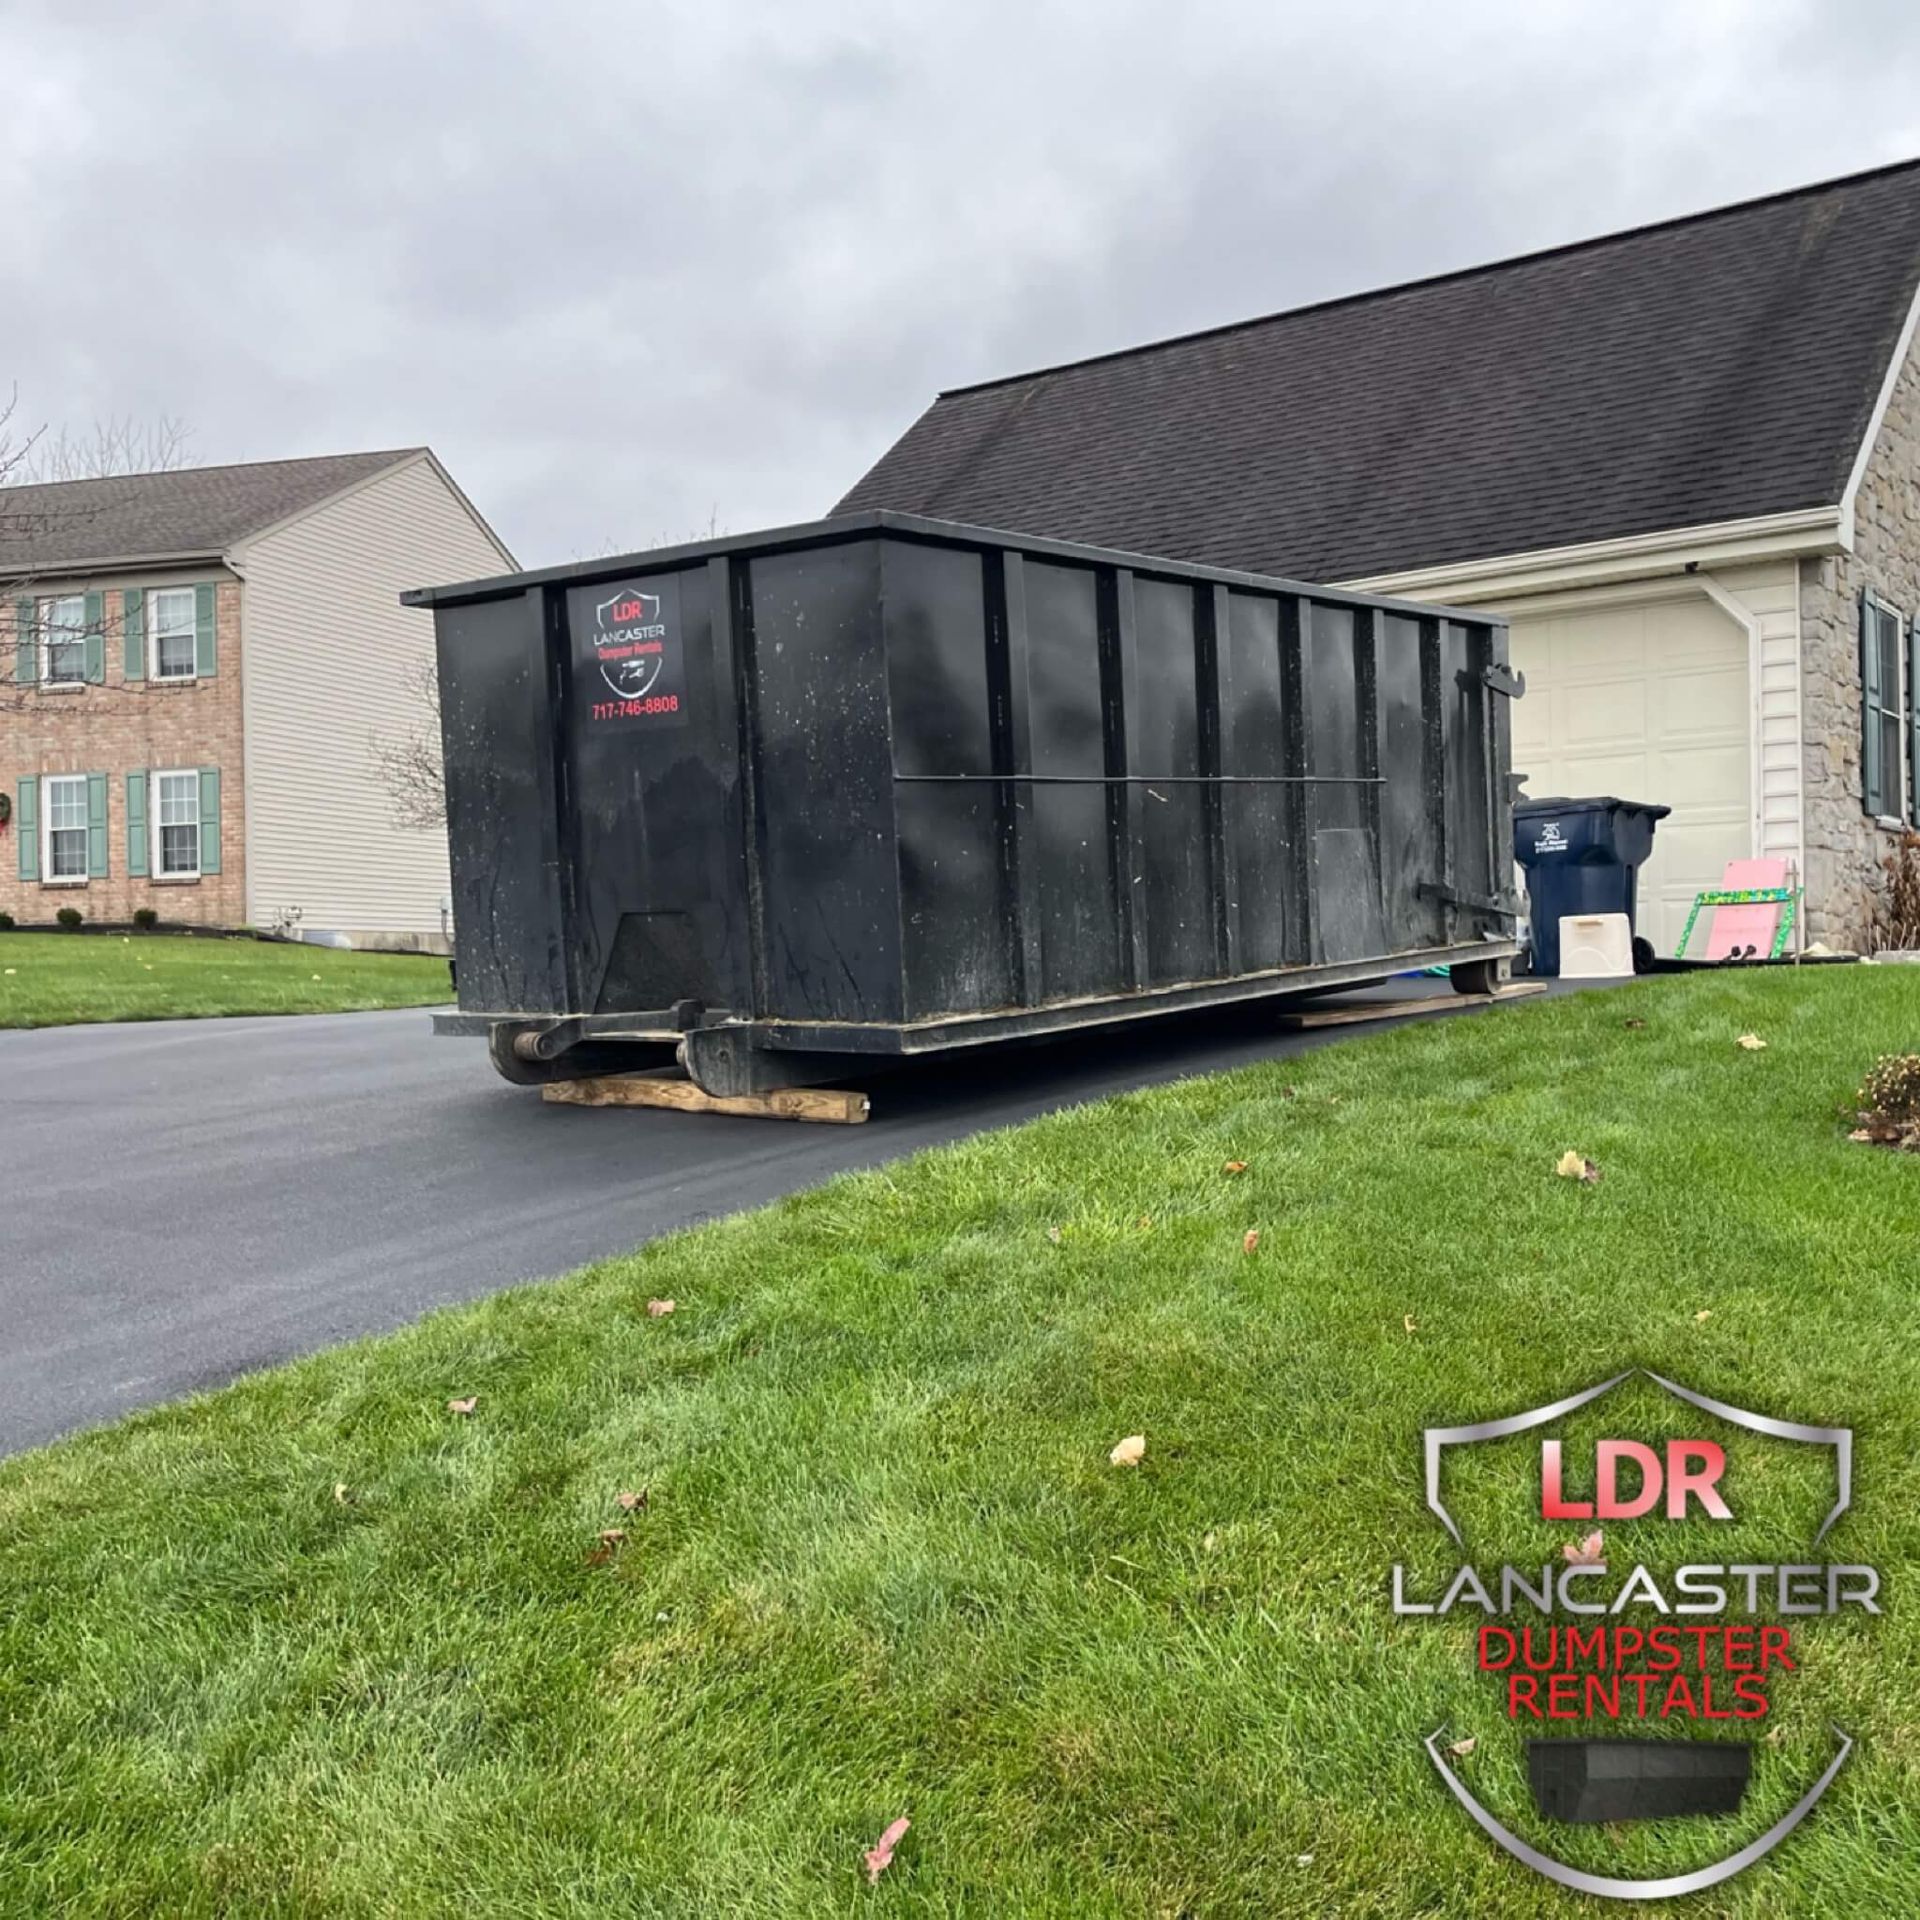 Dumpster Rental in Wrightsville Pa on a sloped driveway for a resident to use to get ready to move.